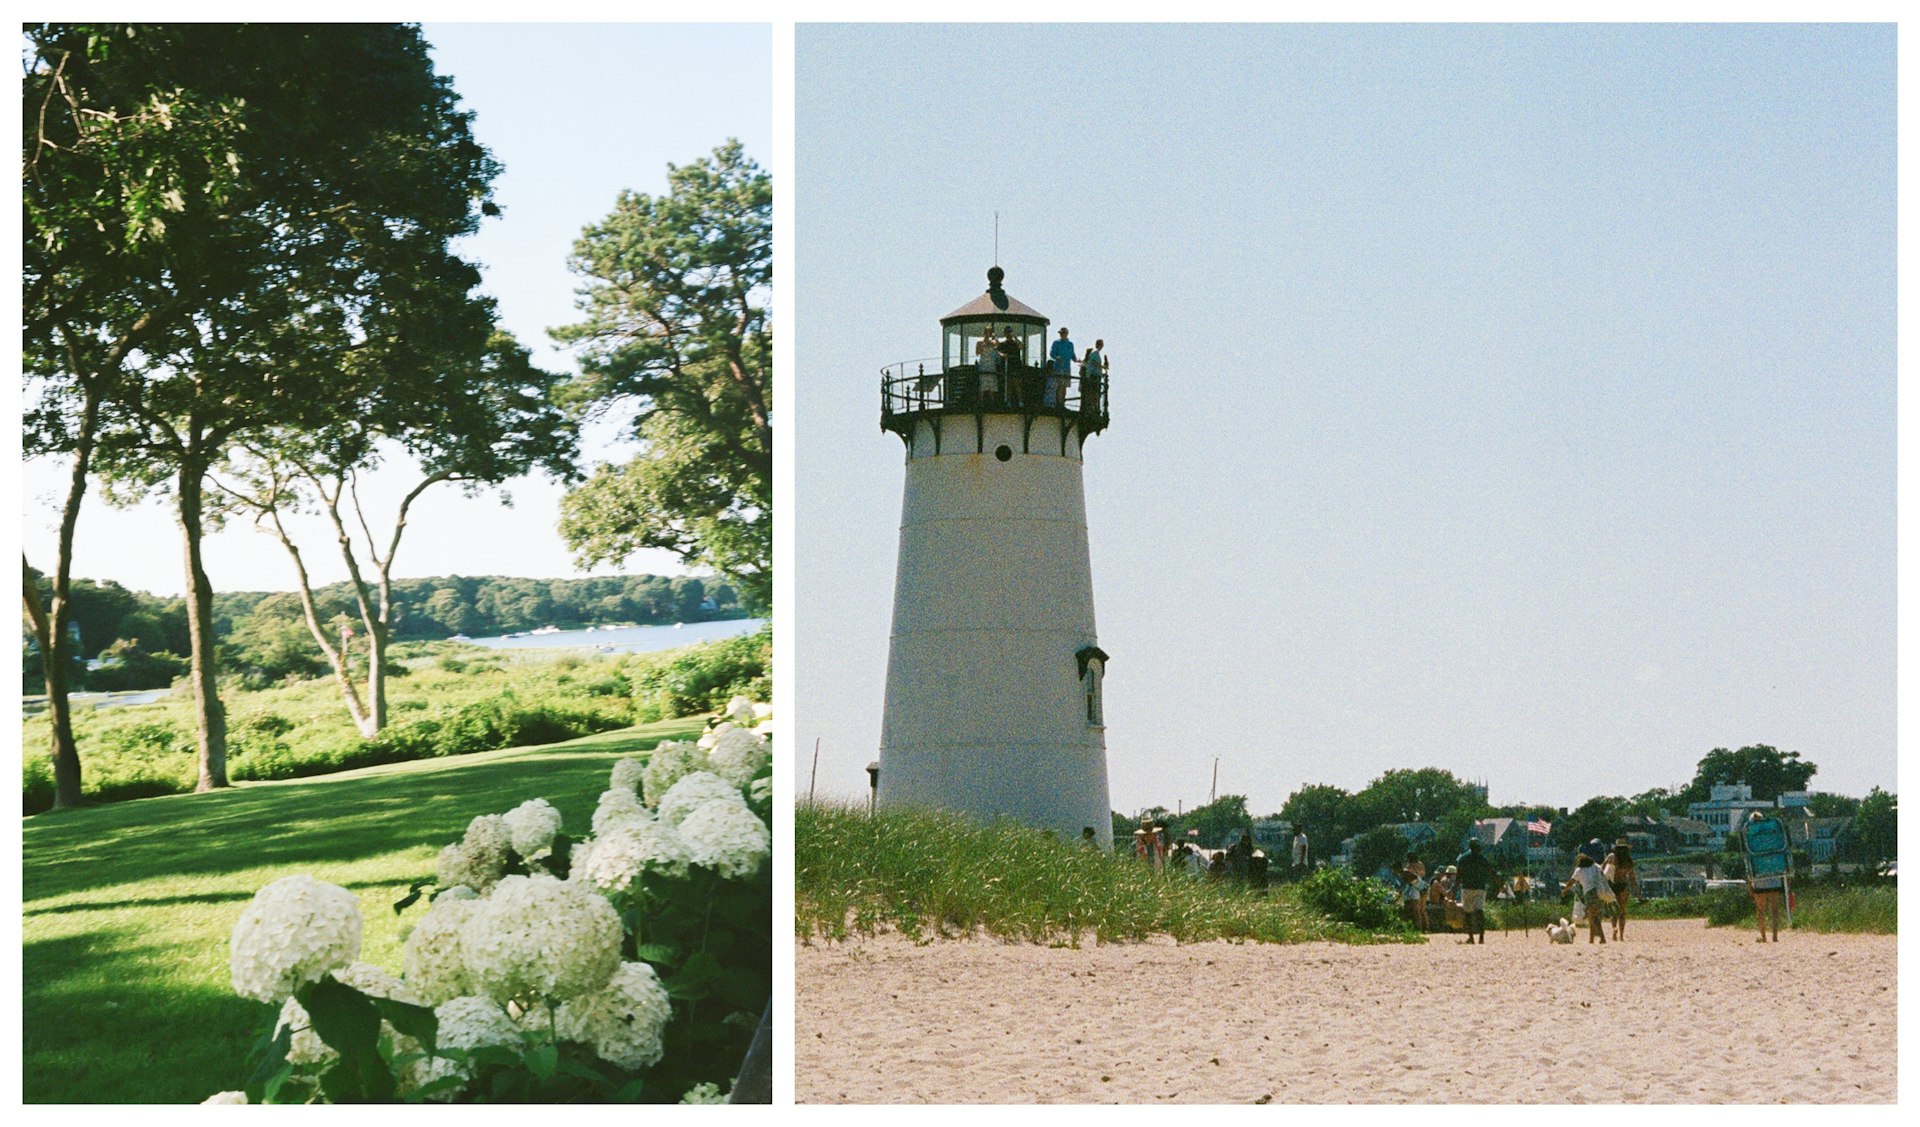 Collage of images from Martha's Vineyard - L: hydrangeas and a grassy lawn, R: Lighthouse Beach 